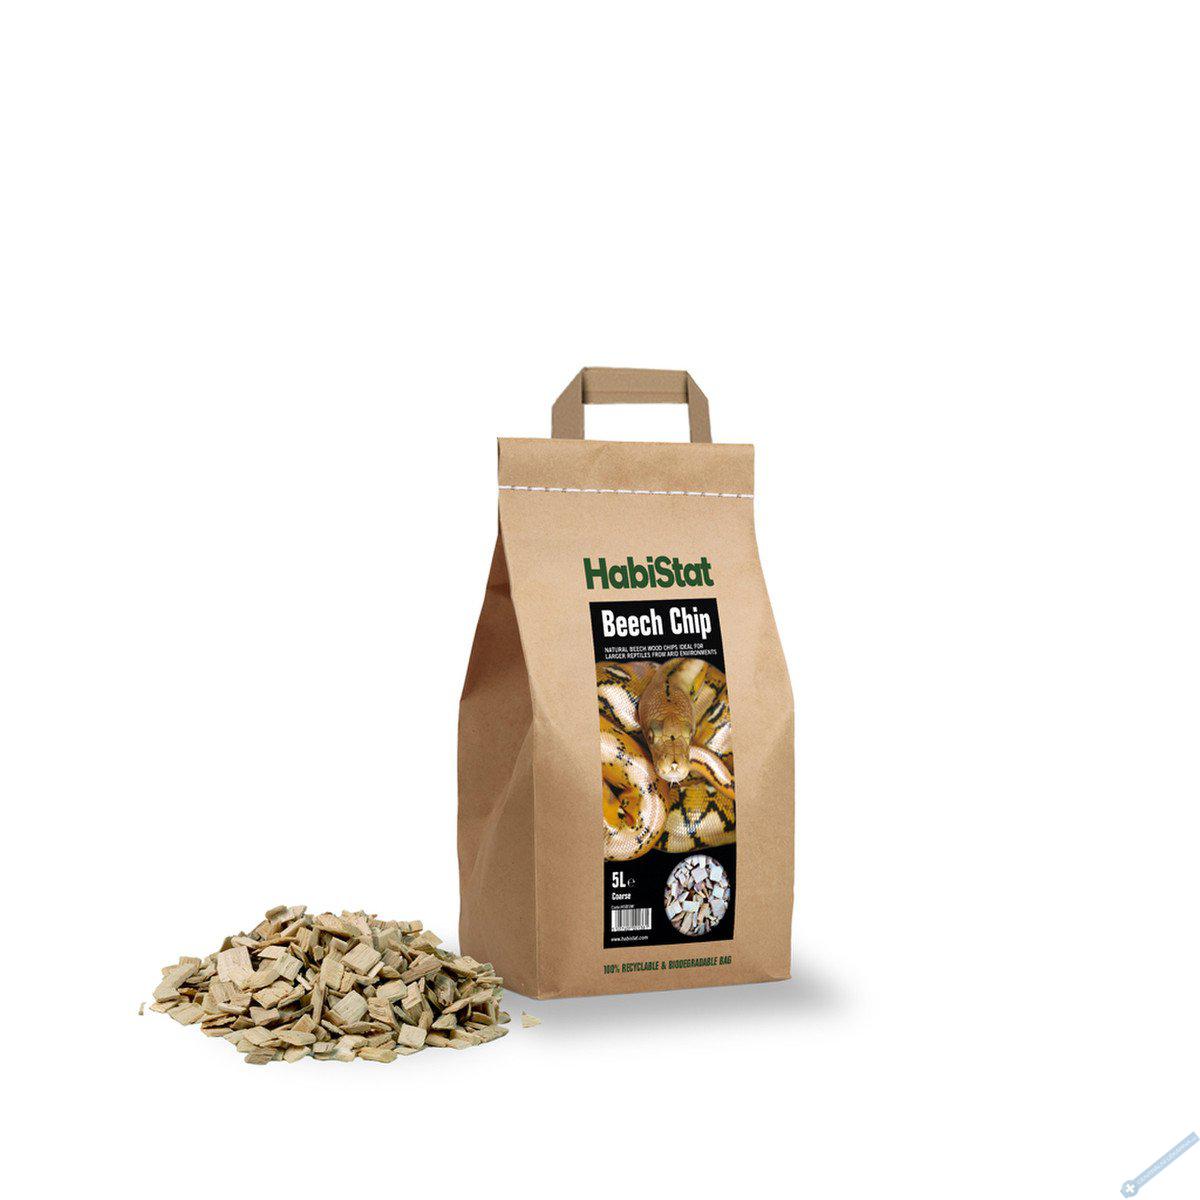 HabiStat Beech Chip Substrate hrub 5l